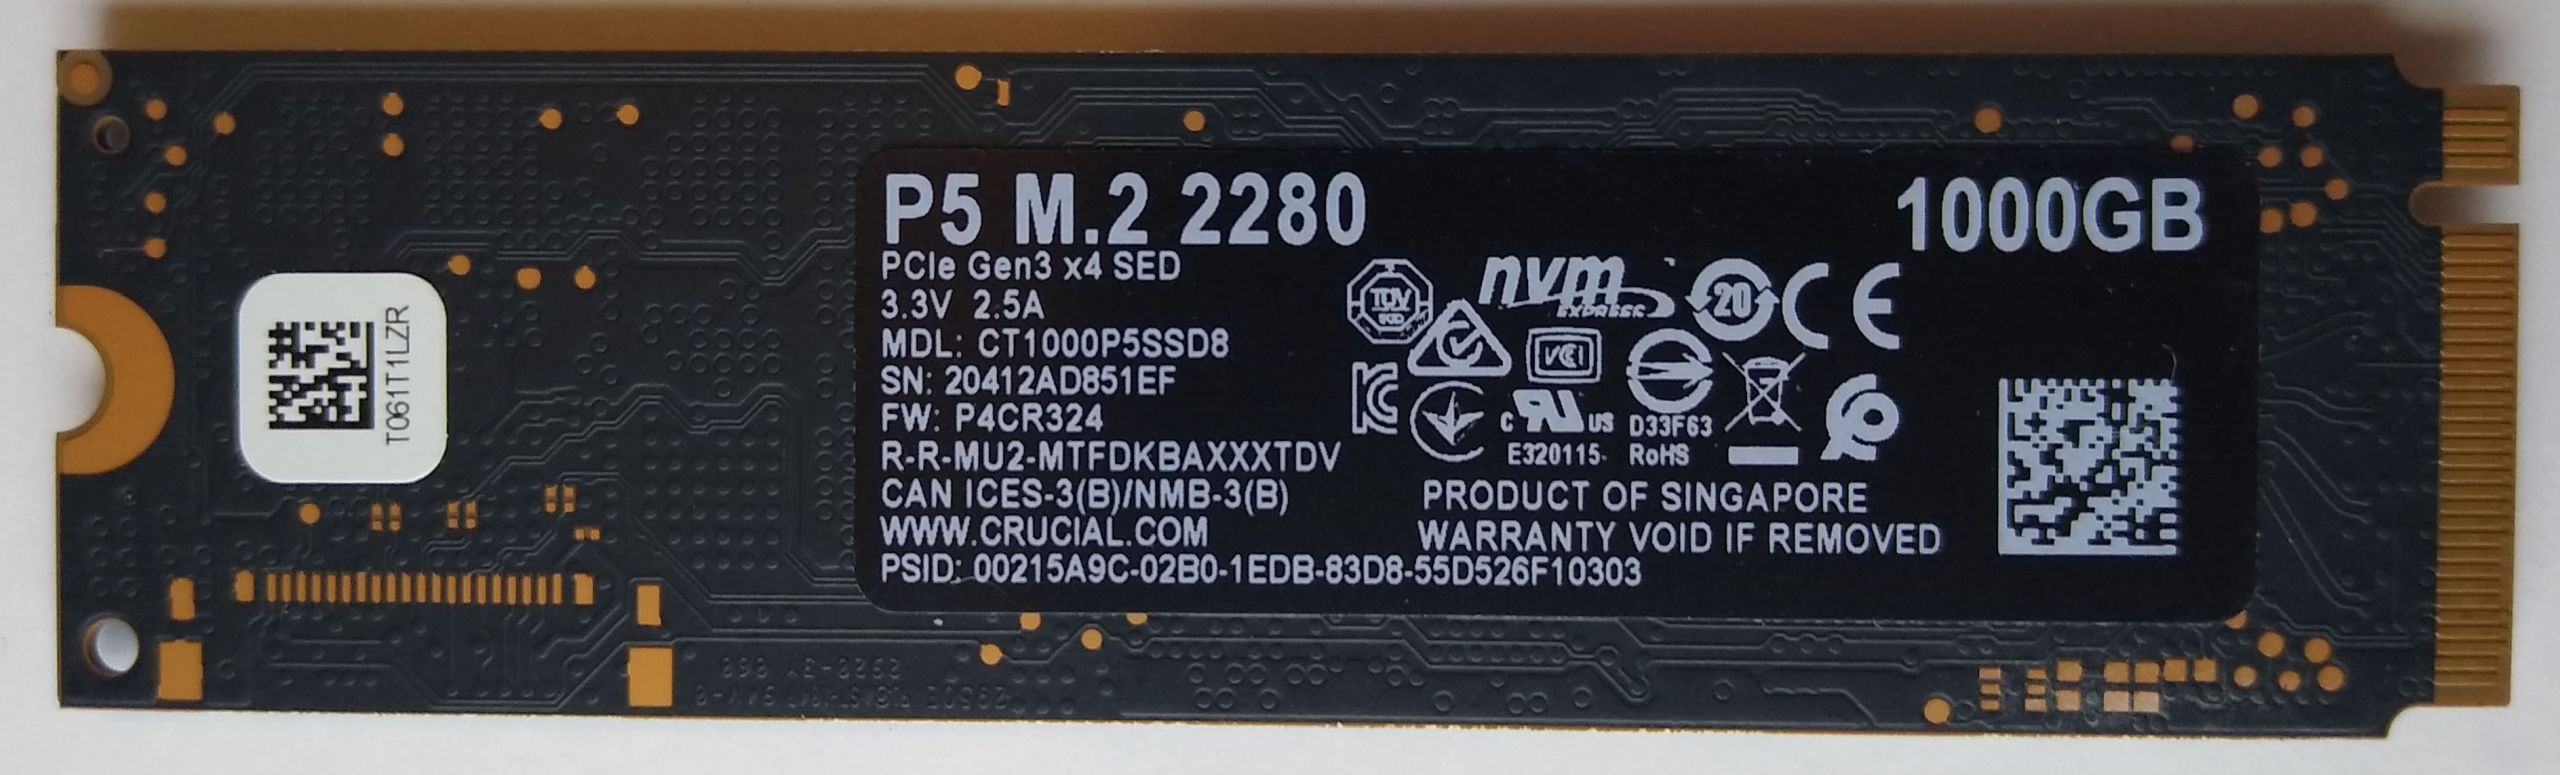 Crucial P5 M.2 NVMe SSD Review